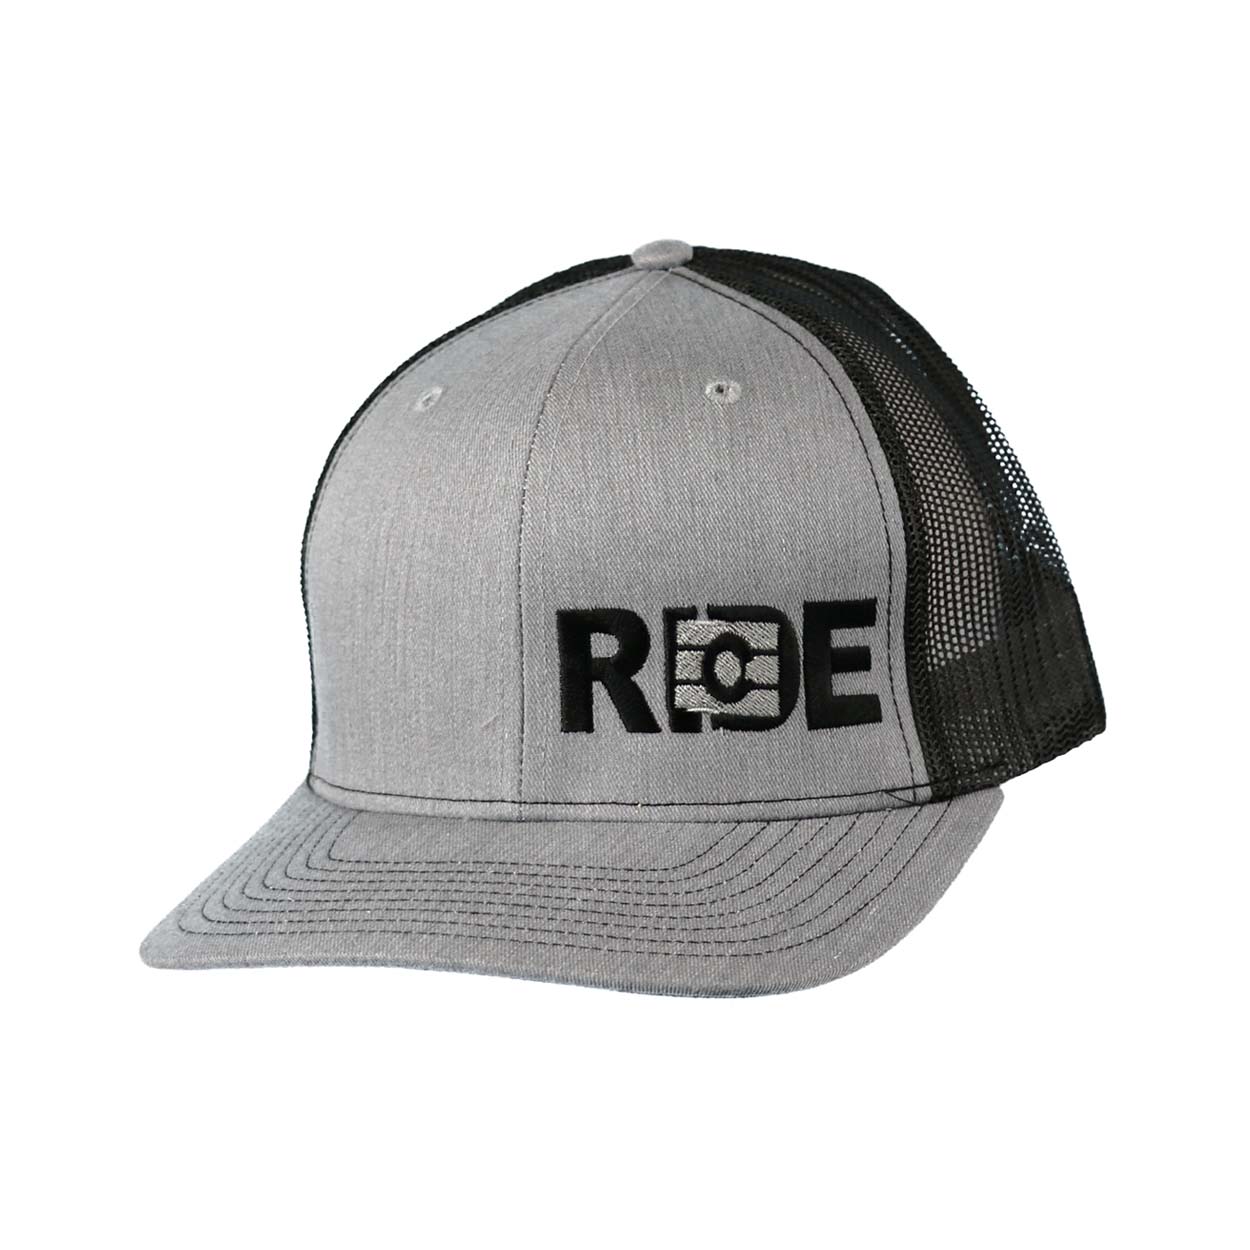 Ride Colorado Night Out Pro Embroidered Snapback Trucker Hat Heather Gray/Black